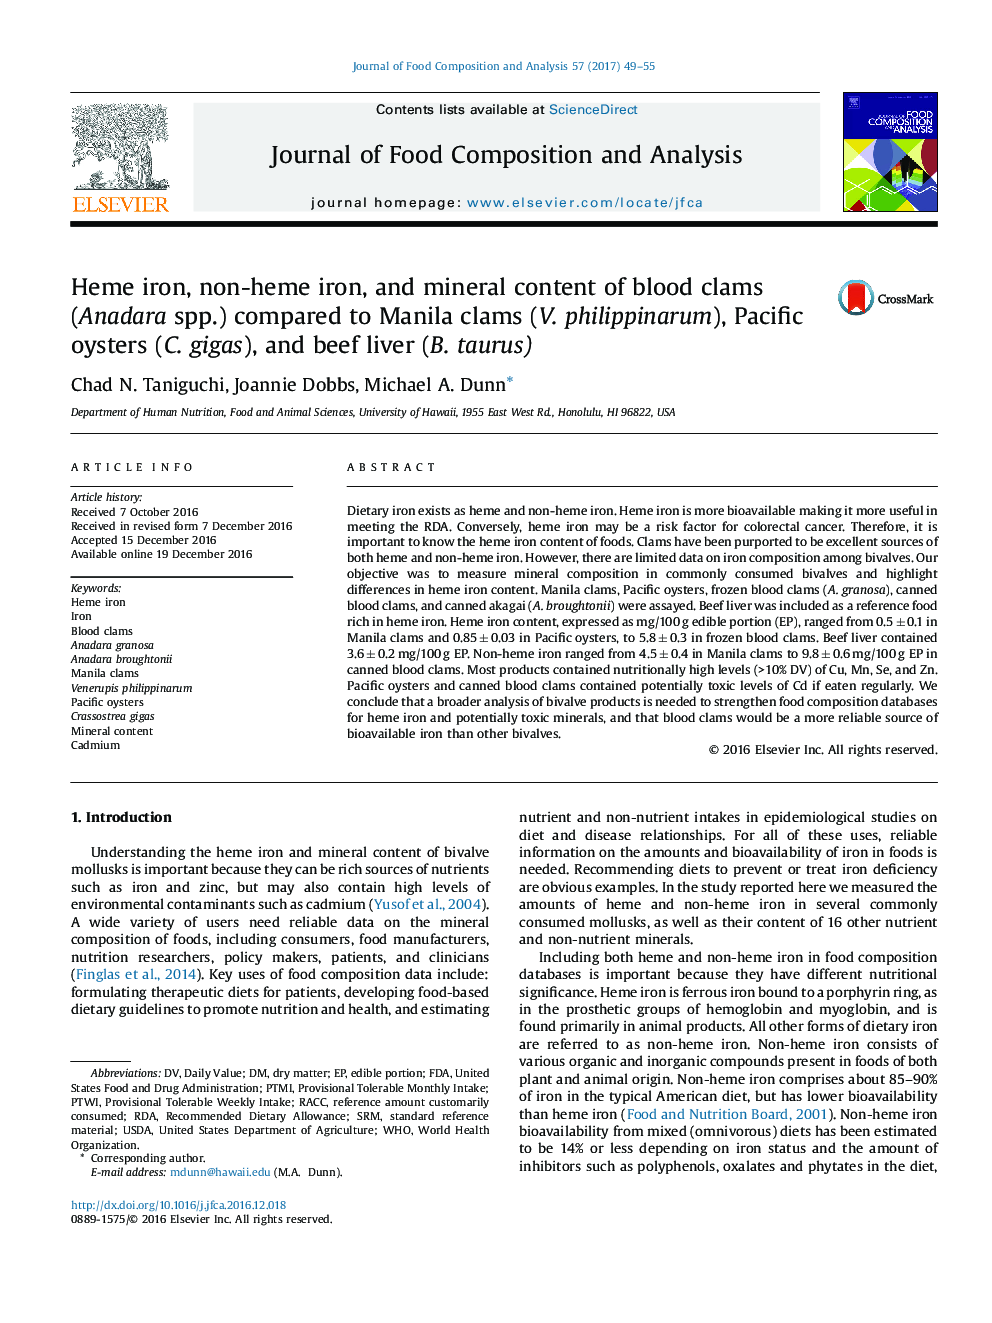 Heme iron, non-heme iron, and mineral content of blood clams (Anadara spp.) compared to Manila clams (V. philippinarum), Pacific oysters (C. gigas), and beef liver (B. taurus)